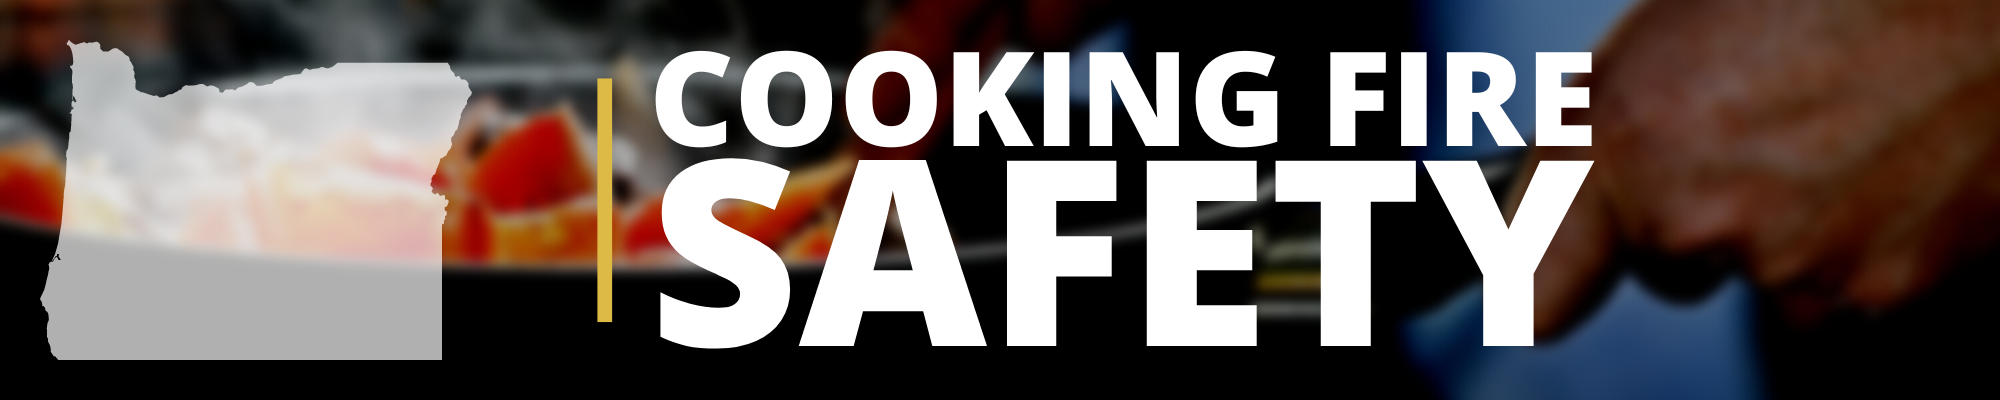 Cooking Fire Safety banner.png